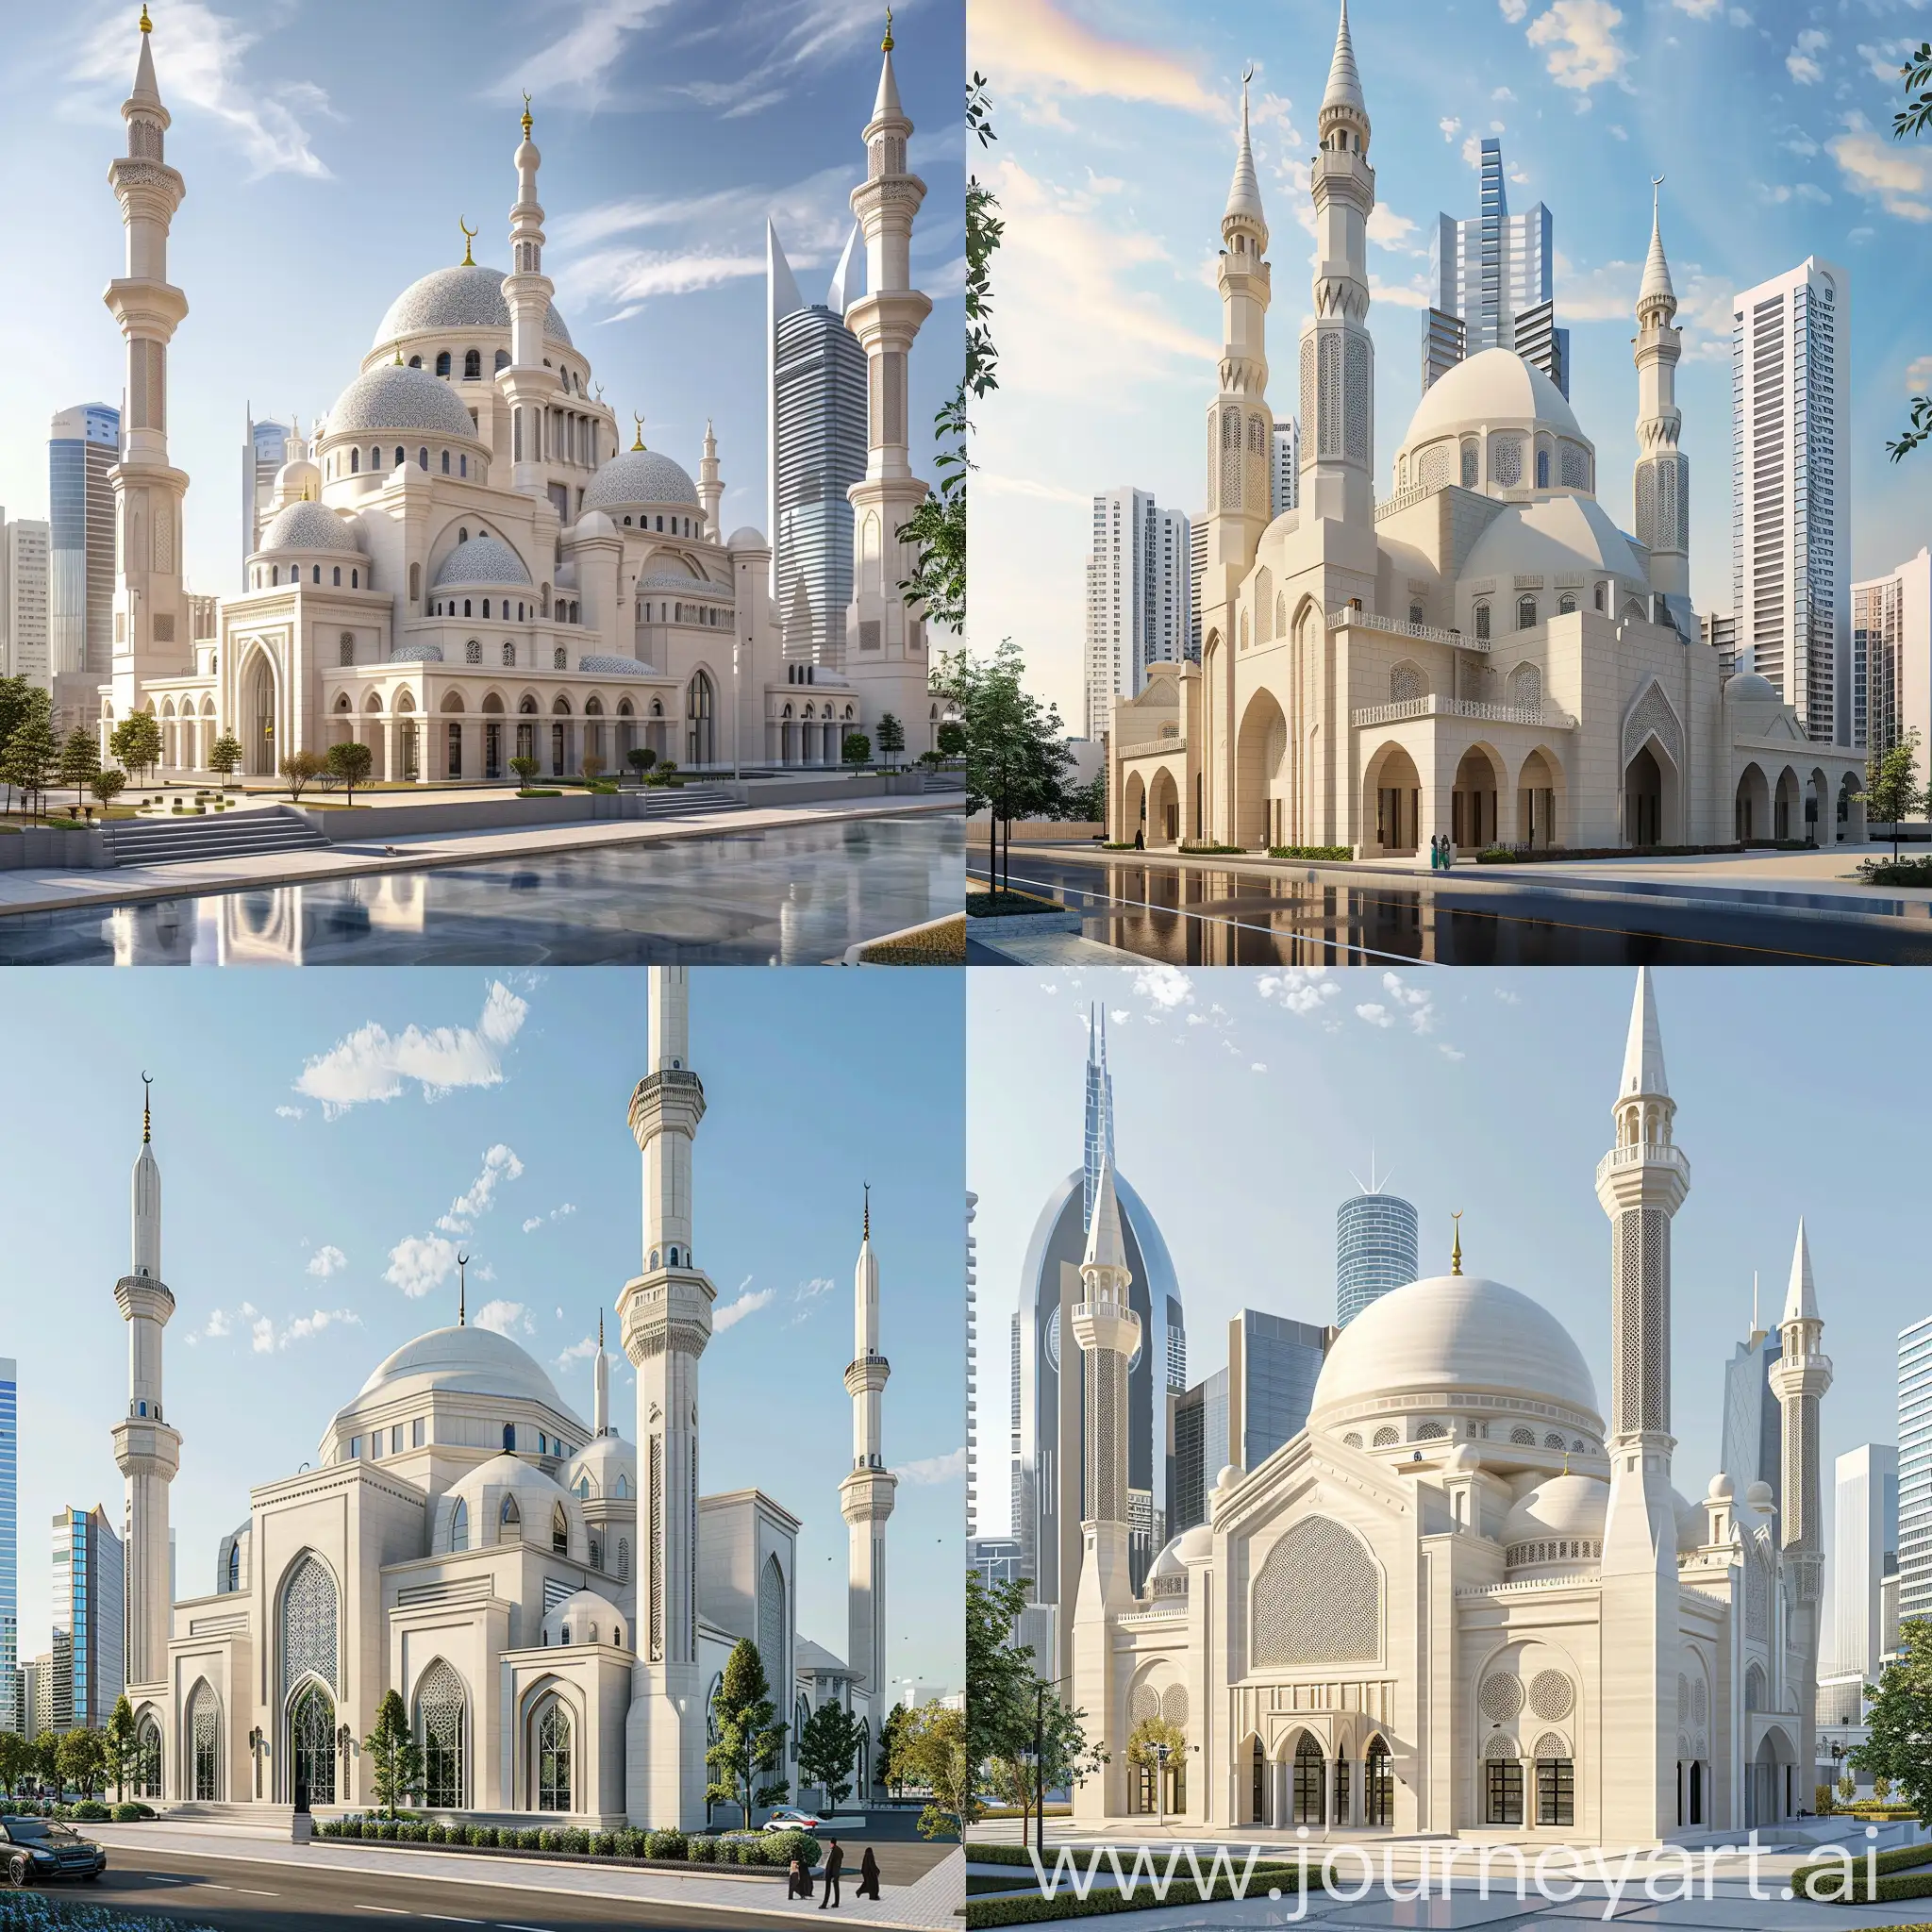 Mosque, in cream color, inspired by modern and classic architectural design, in the middle of modern city
